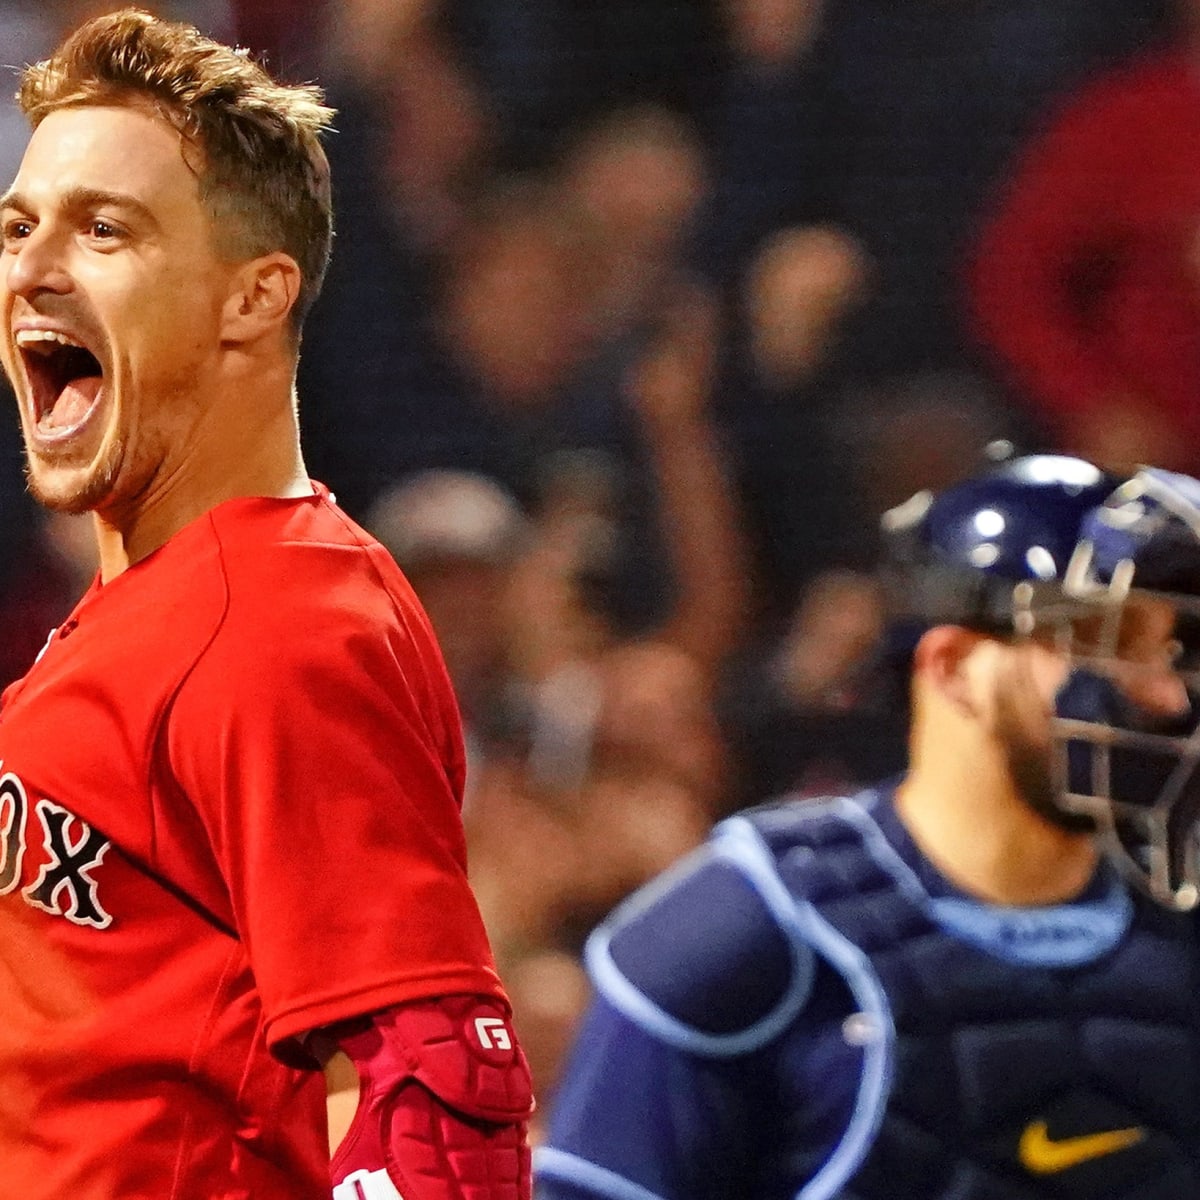 Red Sox to play ALDS Game 4 on Marathon Monday